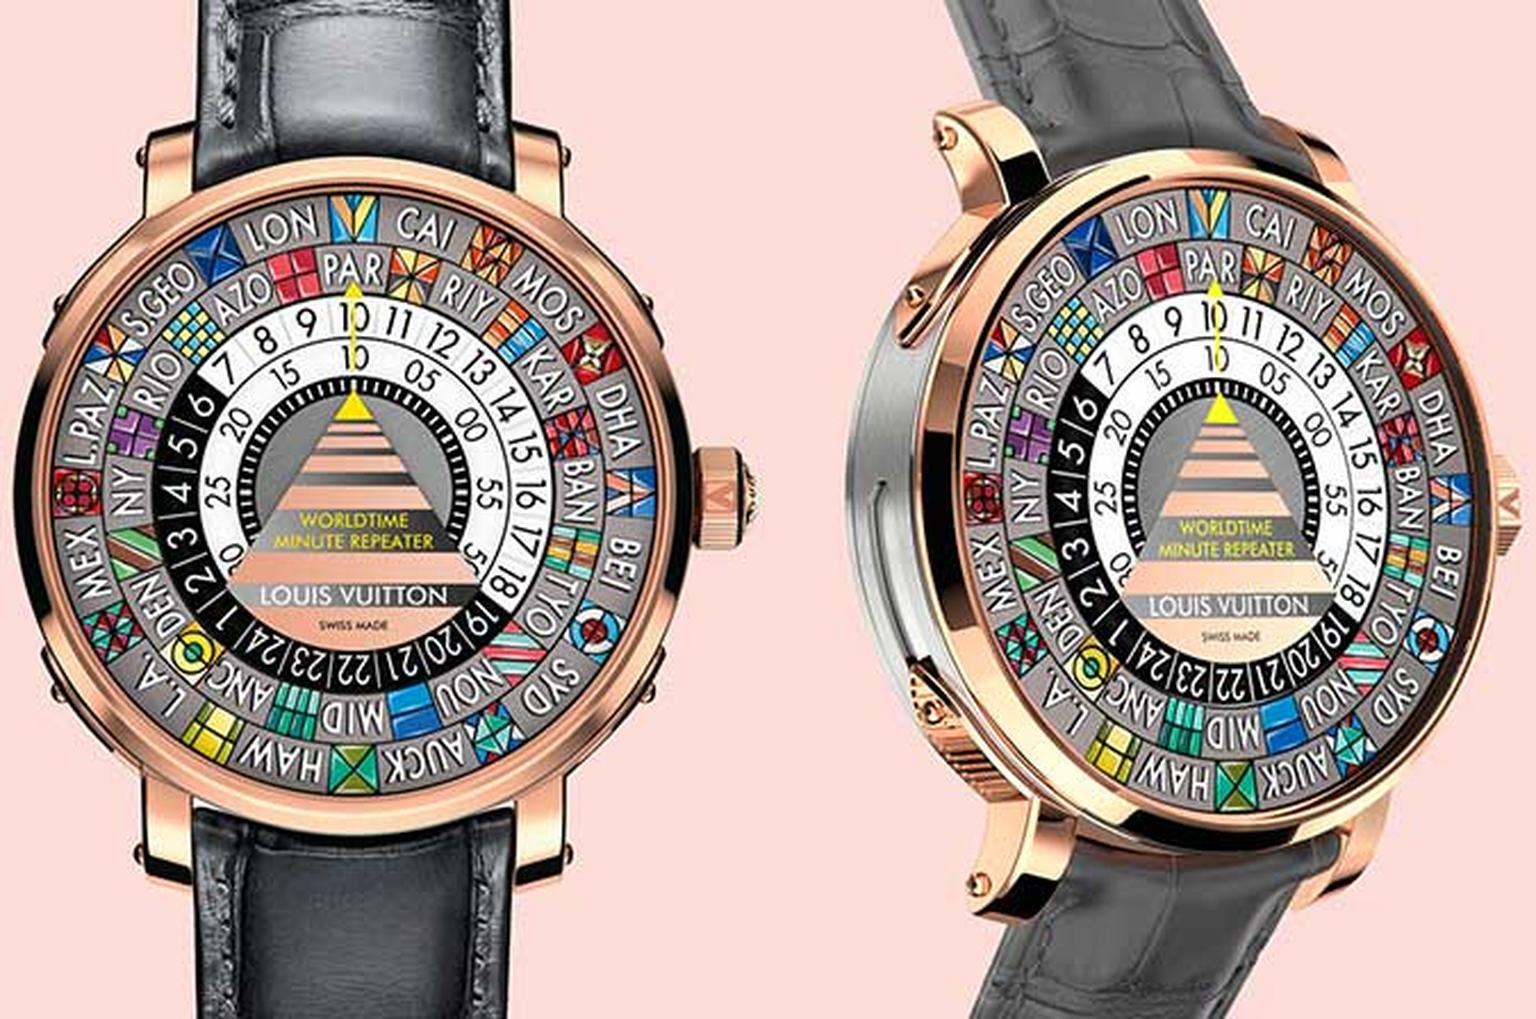 Louis -Vuitton -Worldtime -Minute -Repeater -watch